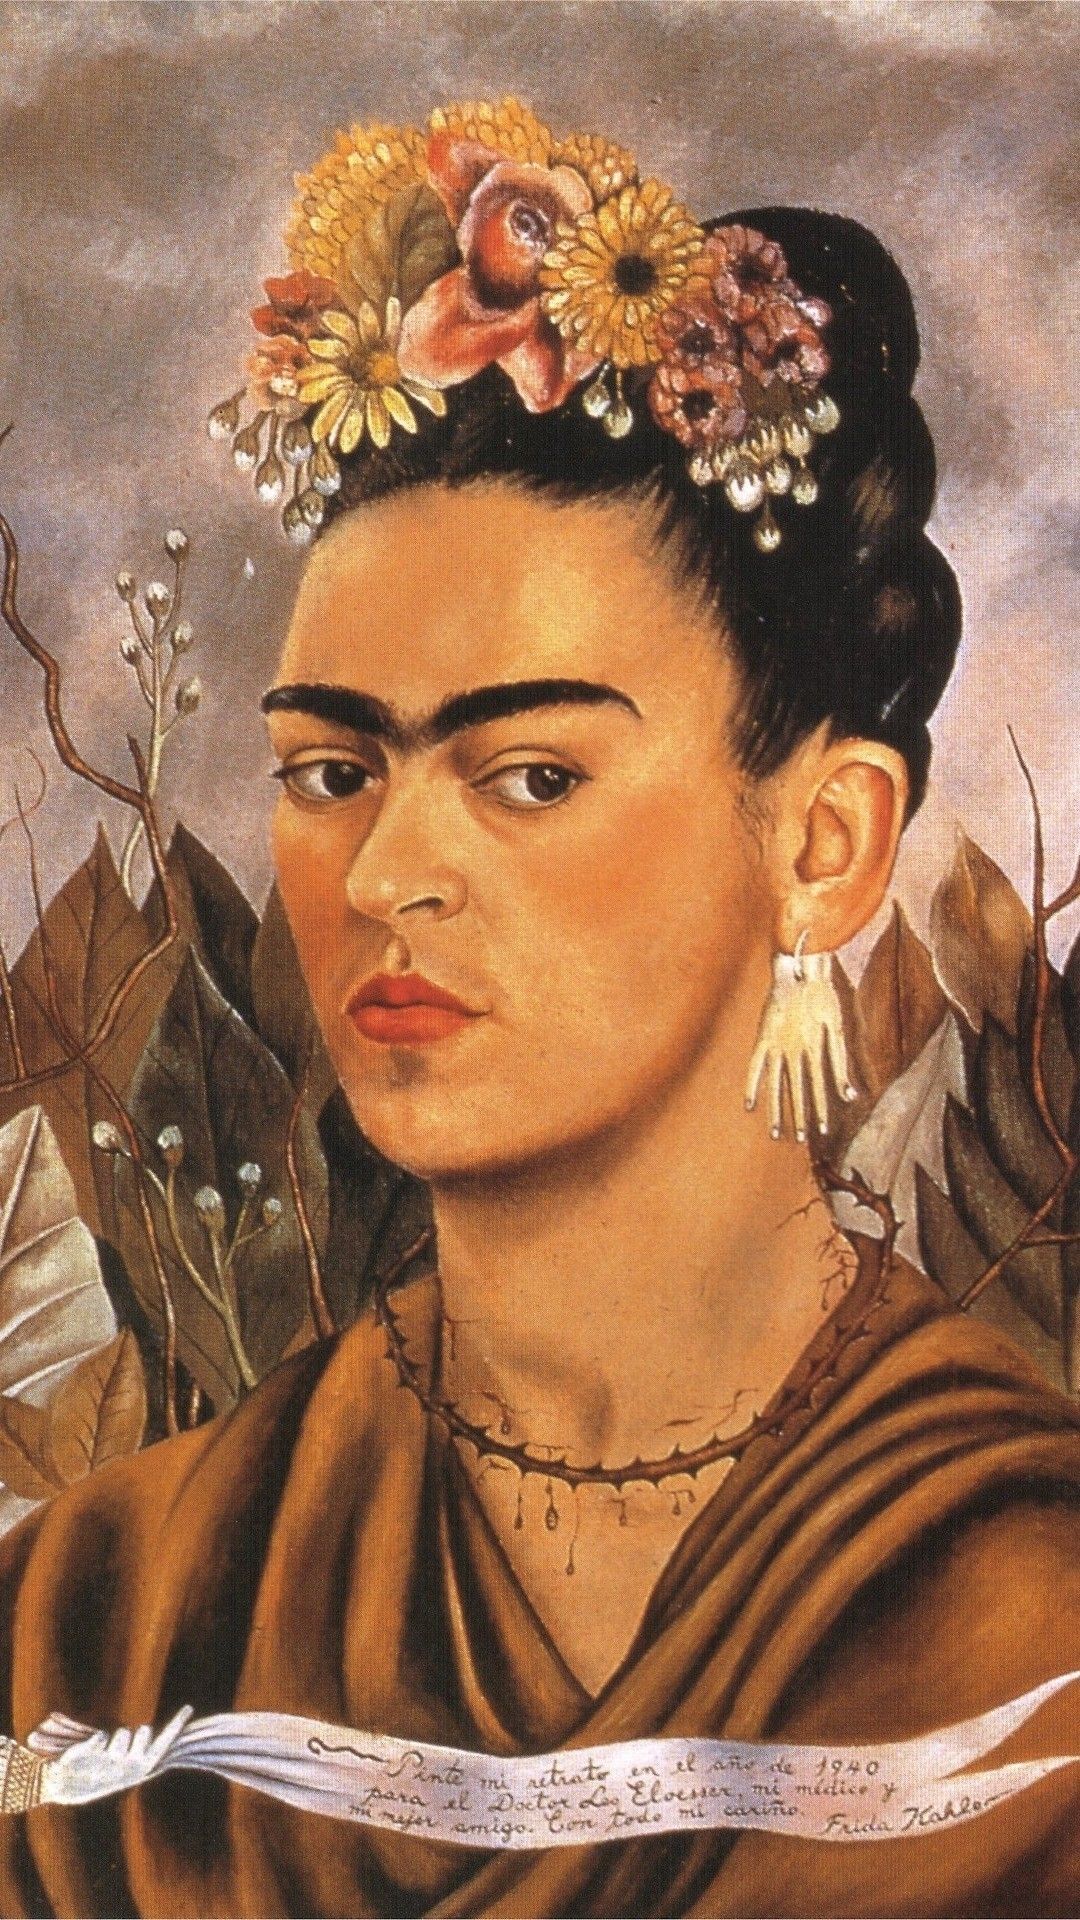 A painting of Frida Kahlo with a brown shawl and flowers in her hair. - Frida Kahlo